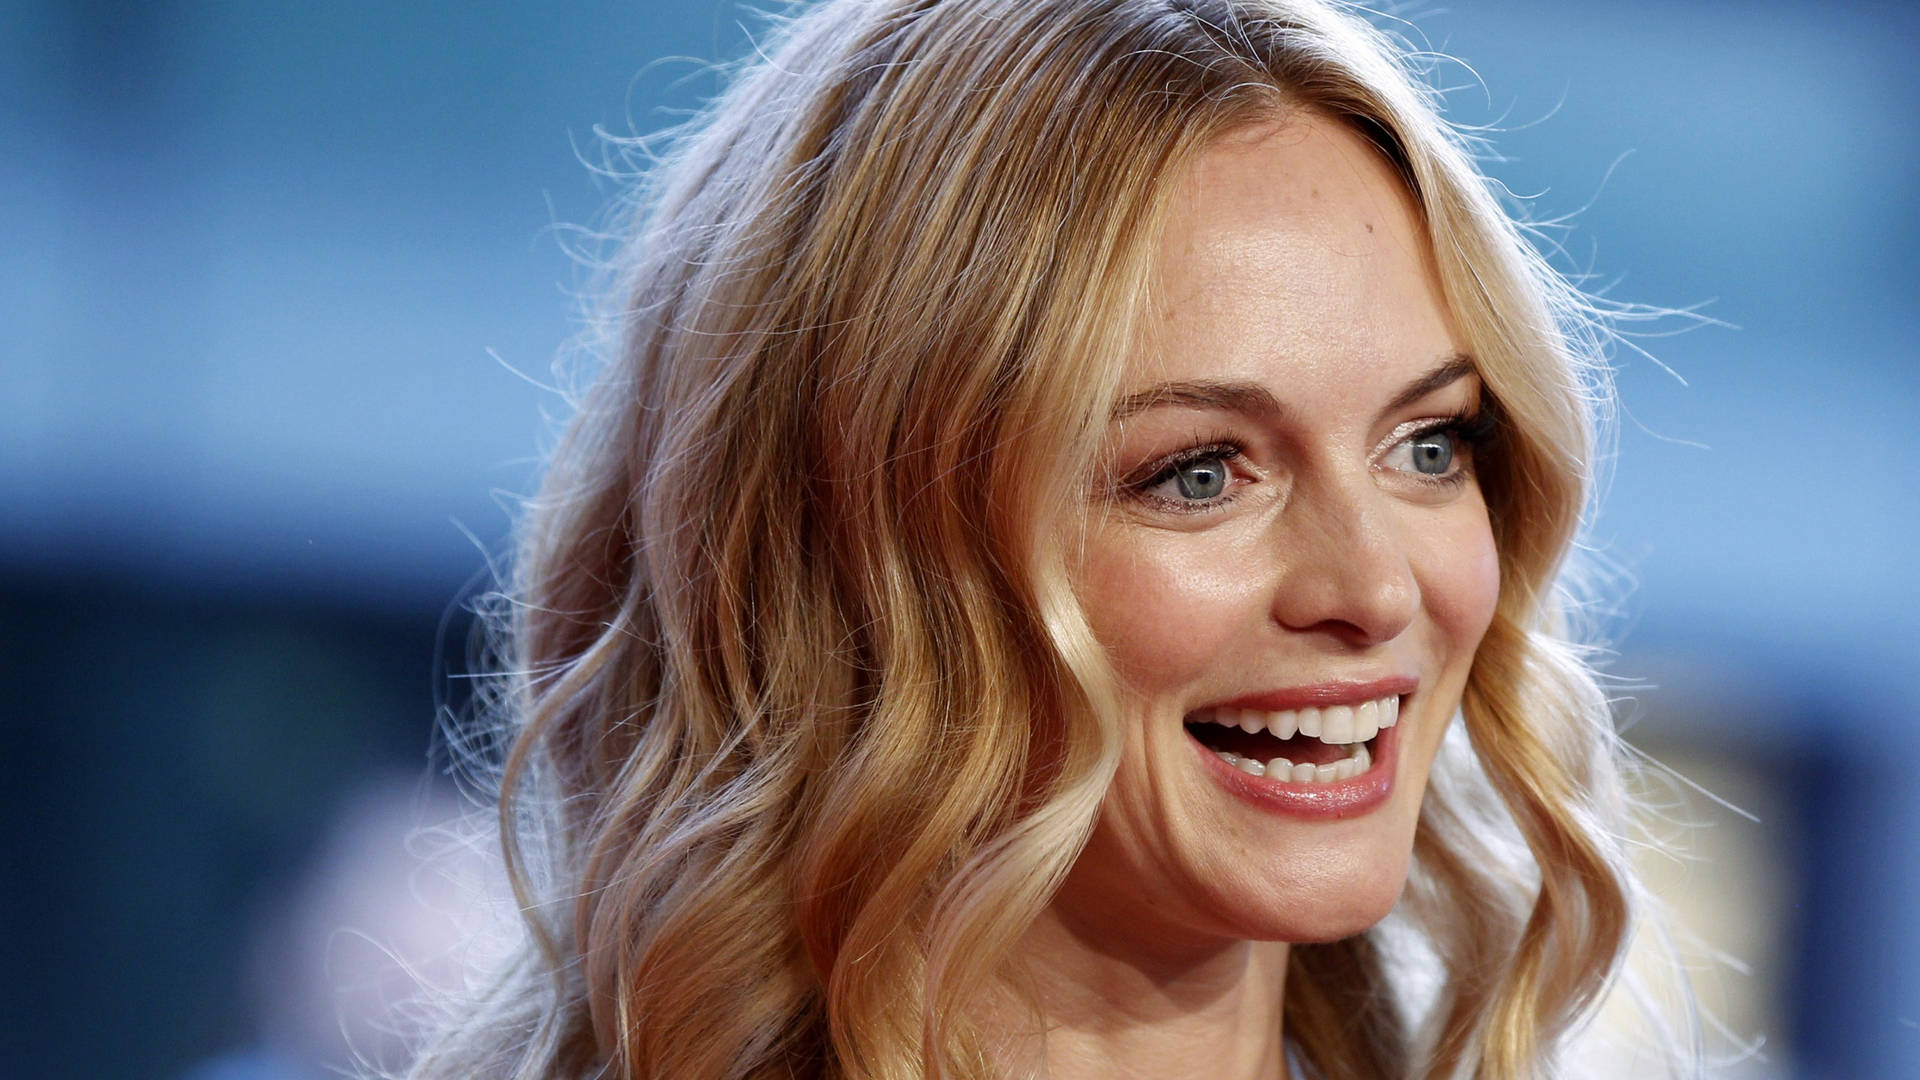 Heather Graham Happy Smile Side Profile Photography Wallpaper